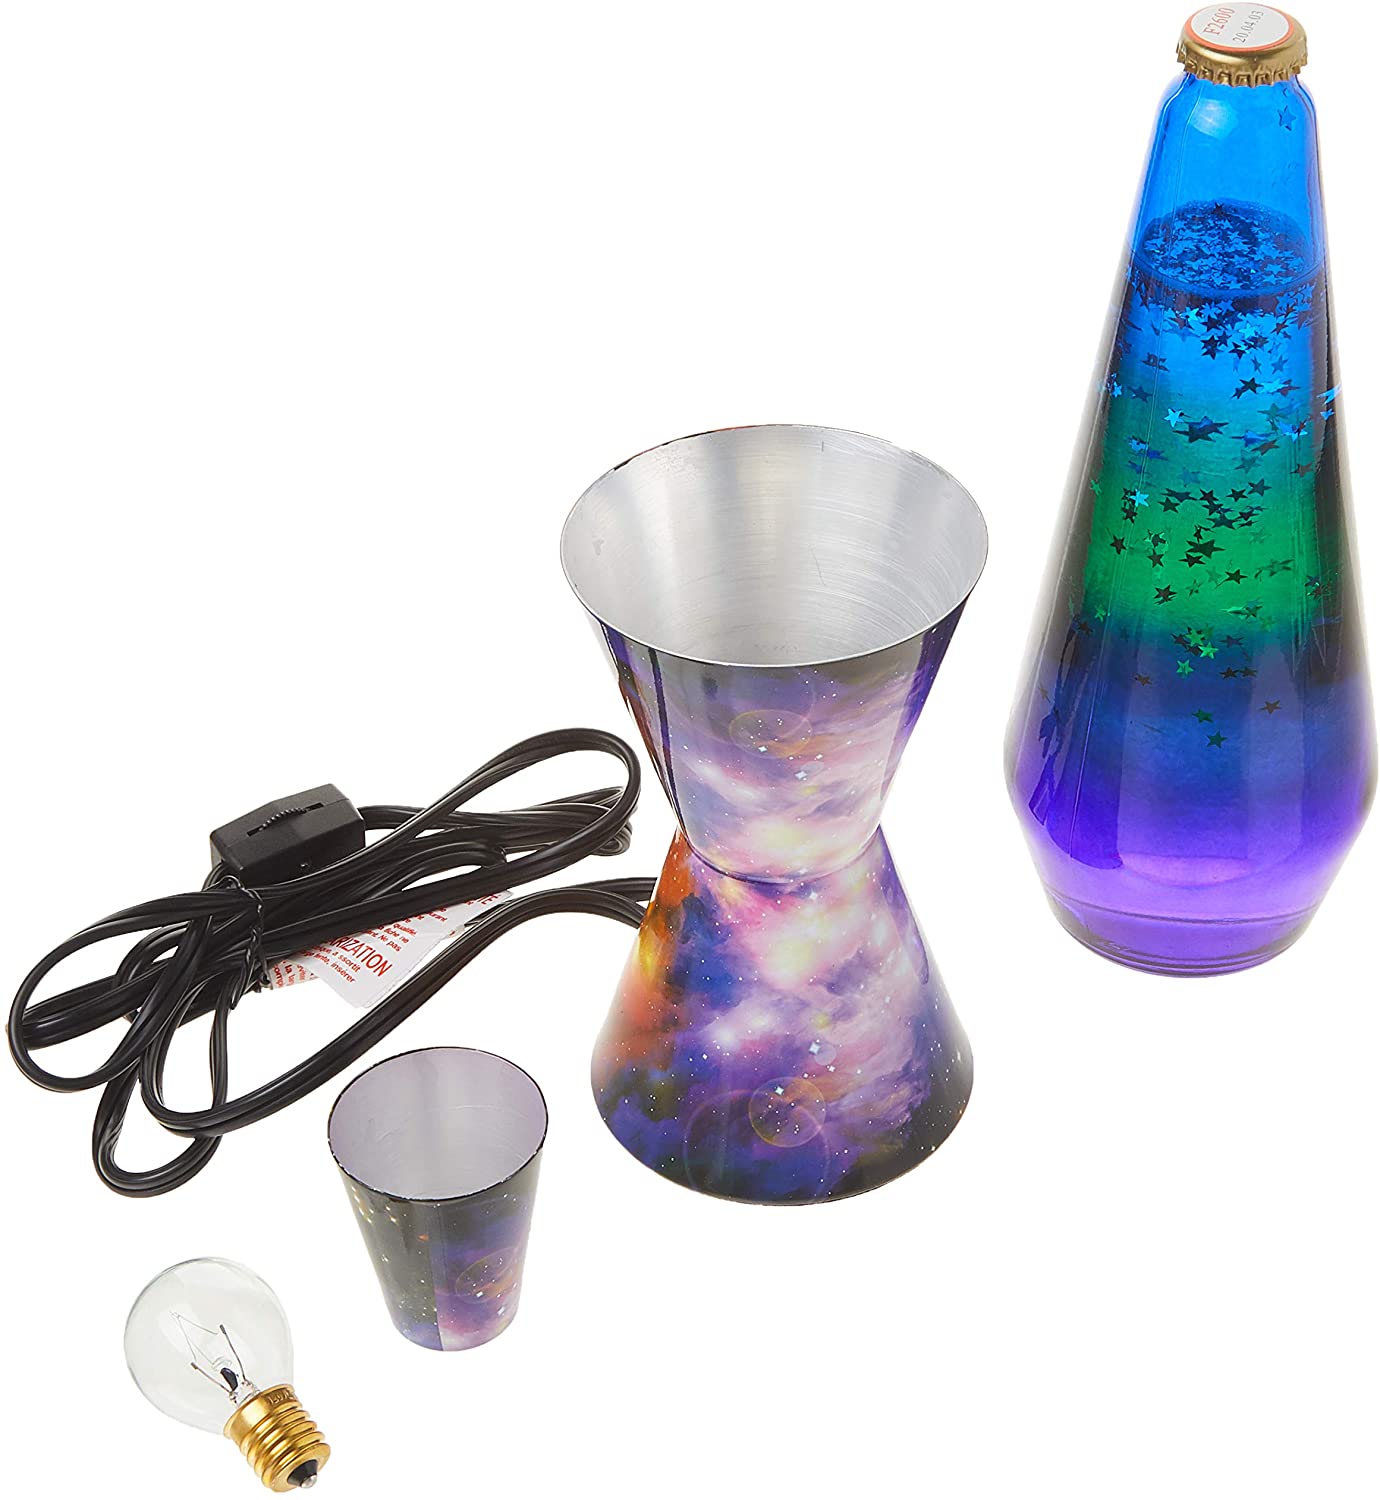 Silver glitter lava lamp 10 Unique Lava Lamps Ideas and Complete Guide Before Buying - 9